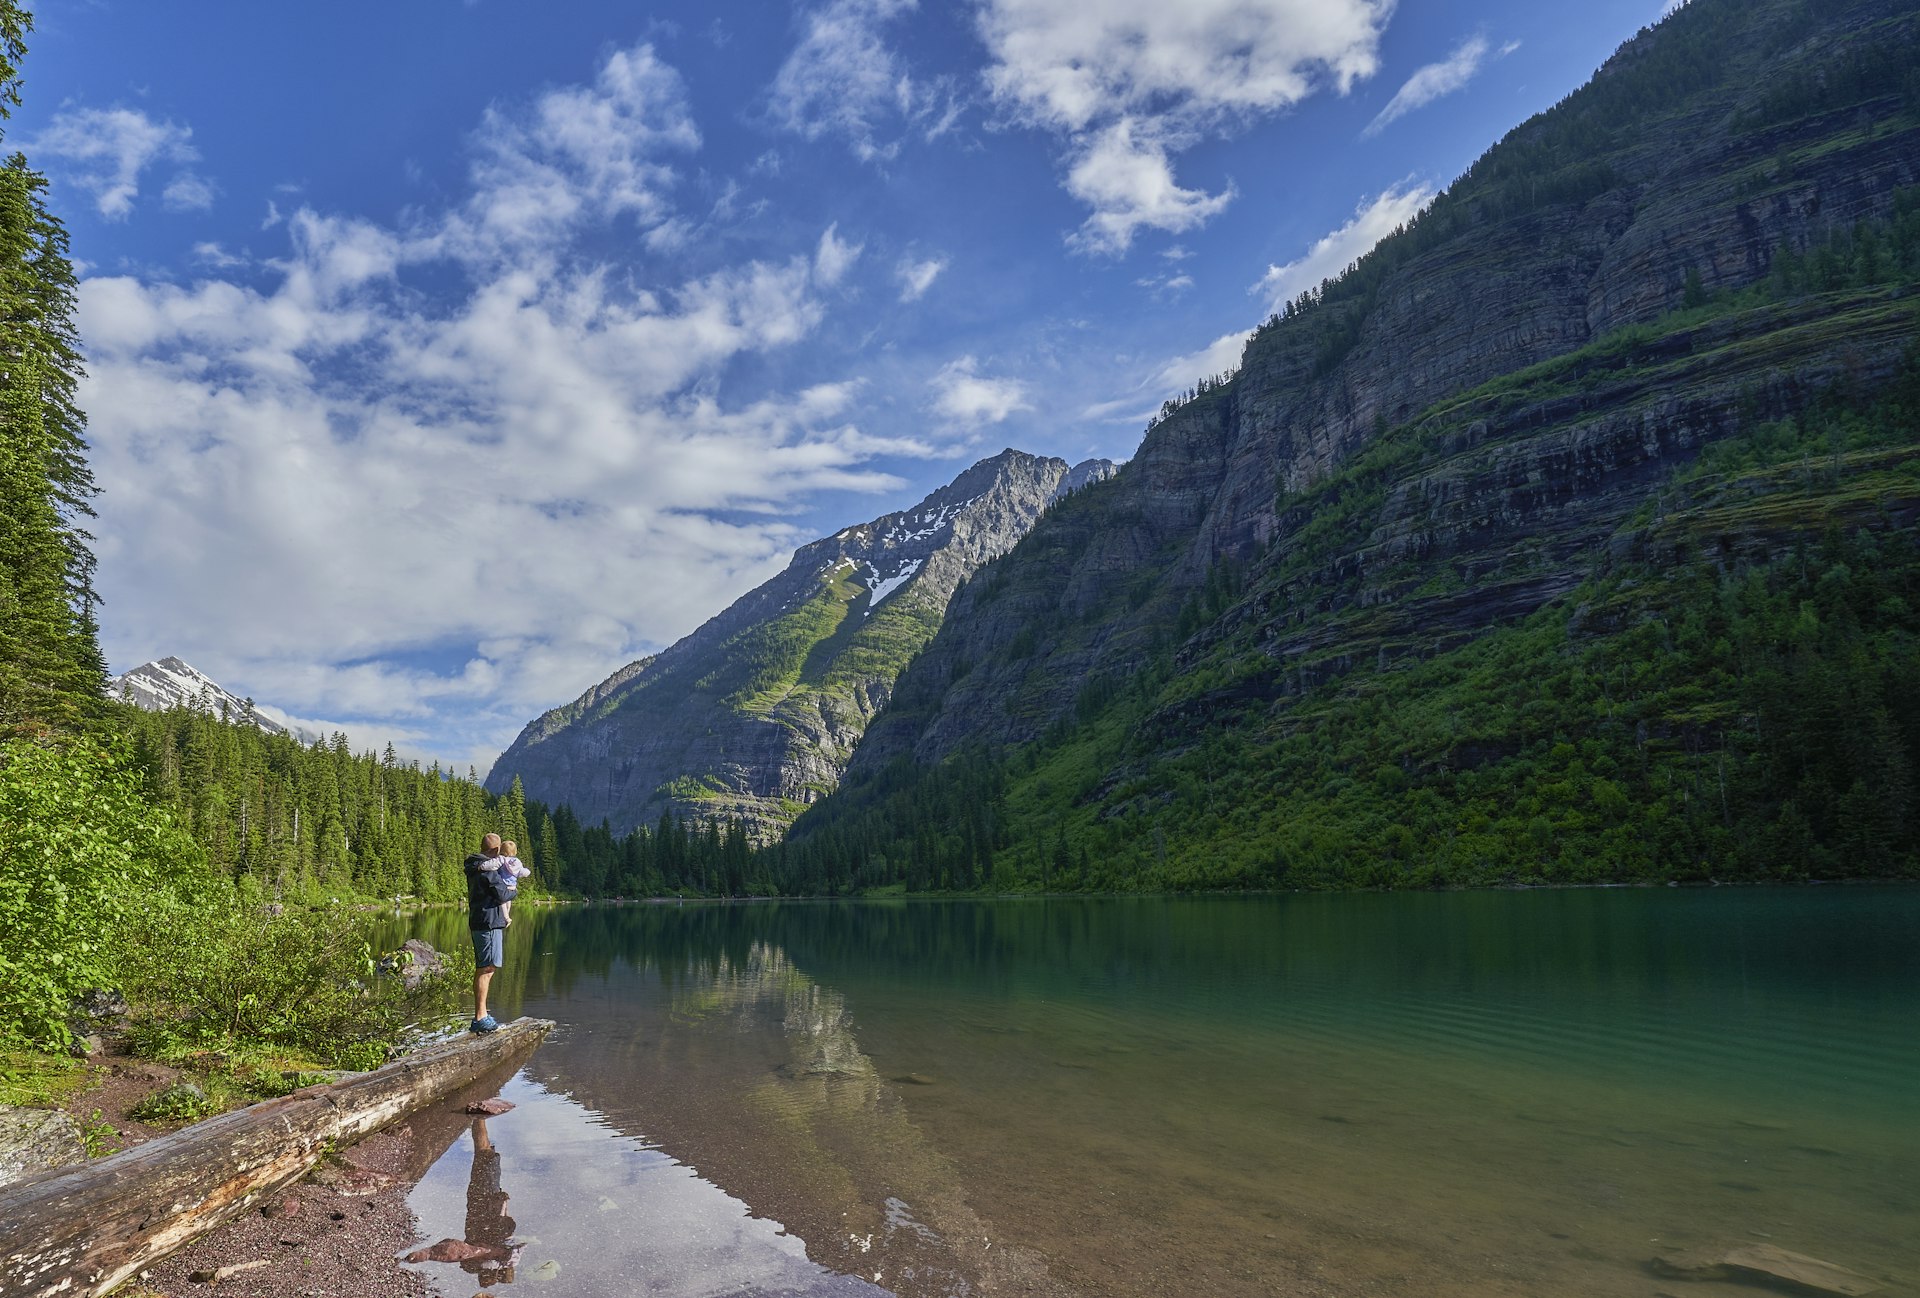 Family on the shore of Avalanche Lake in Glacier National Park